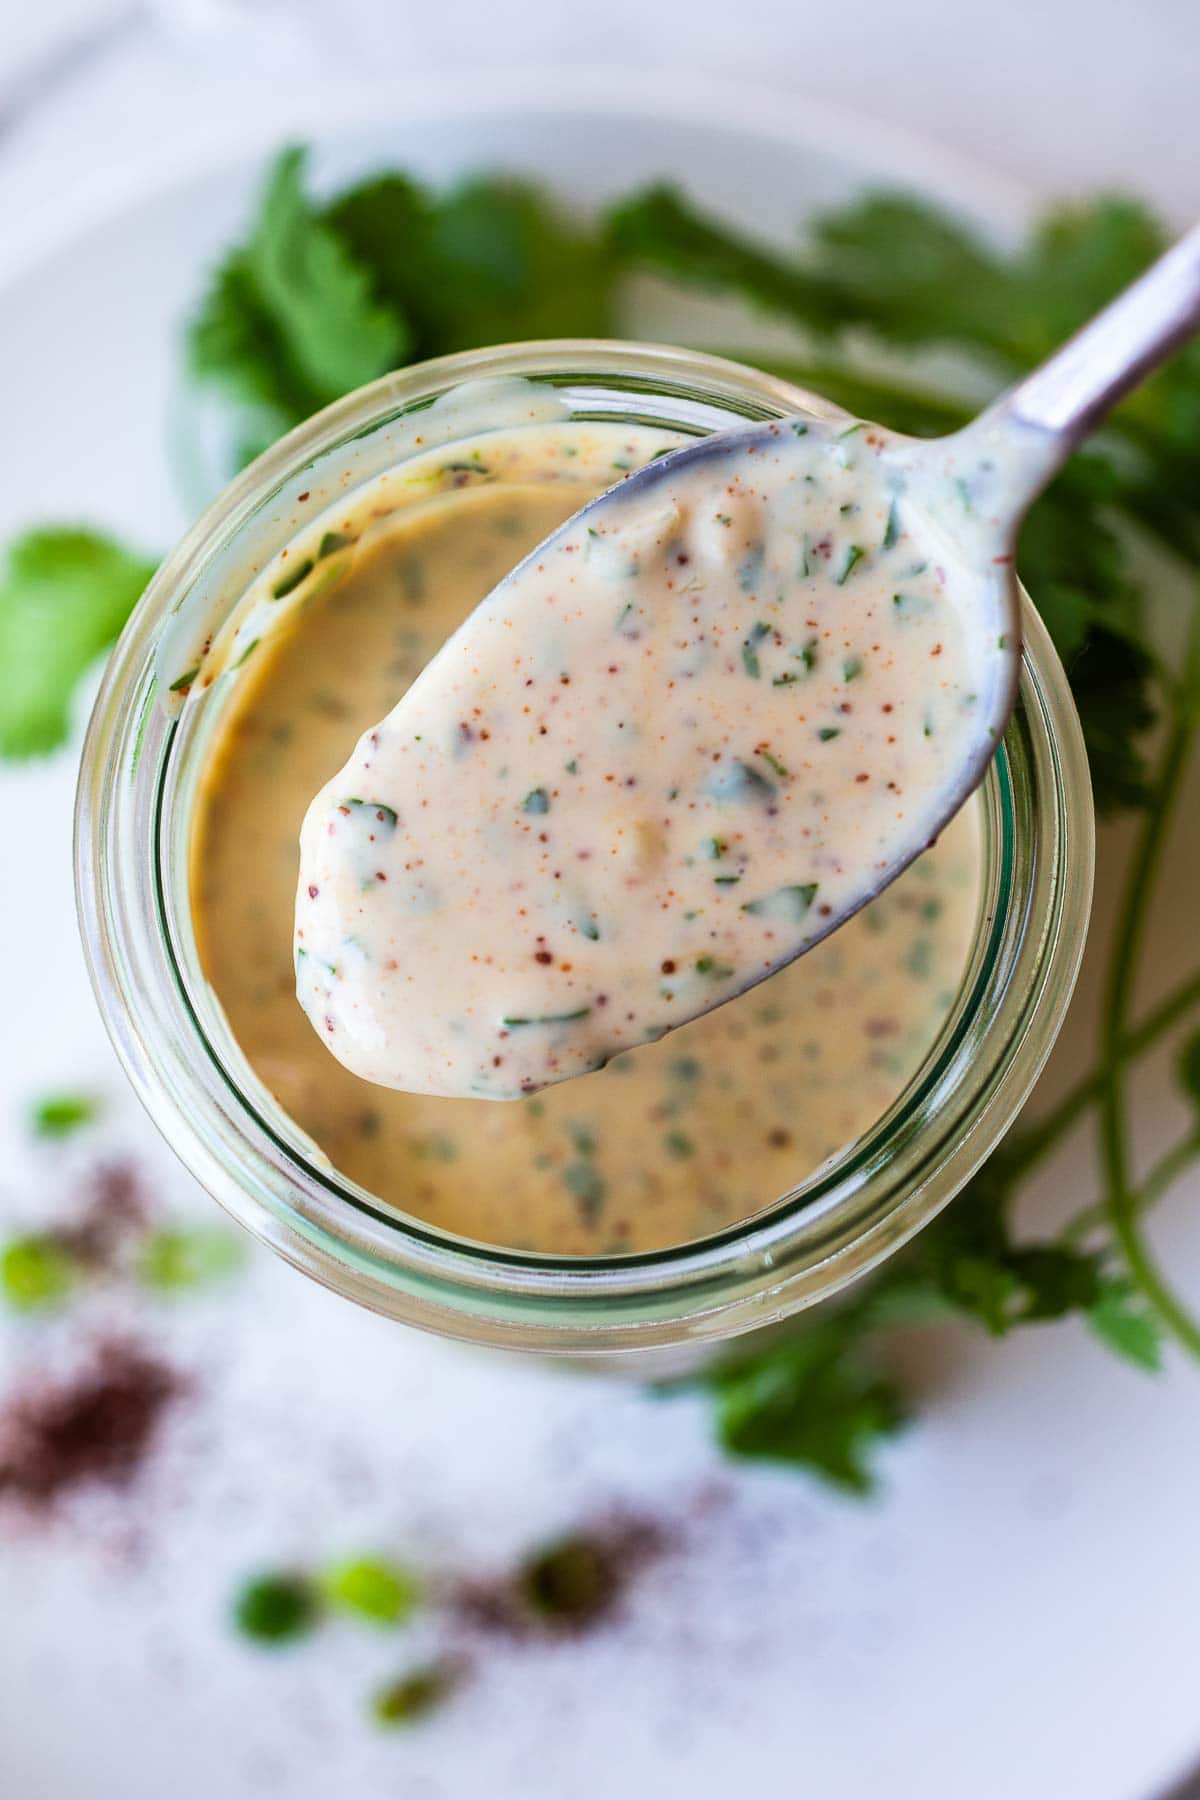 Creamy and smoky, homemade Chipotle Ranch Dressing takes things up a notch. With fresh lime juice, herbs and just the right amount of chipotle pepper kick, this zesty dressing is also delicious as a dip or a spread! Vegan adaptable and gluten-free!